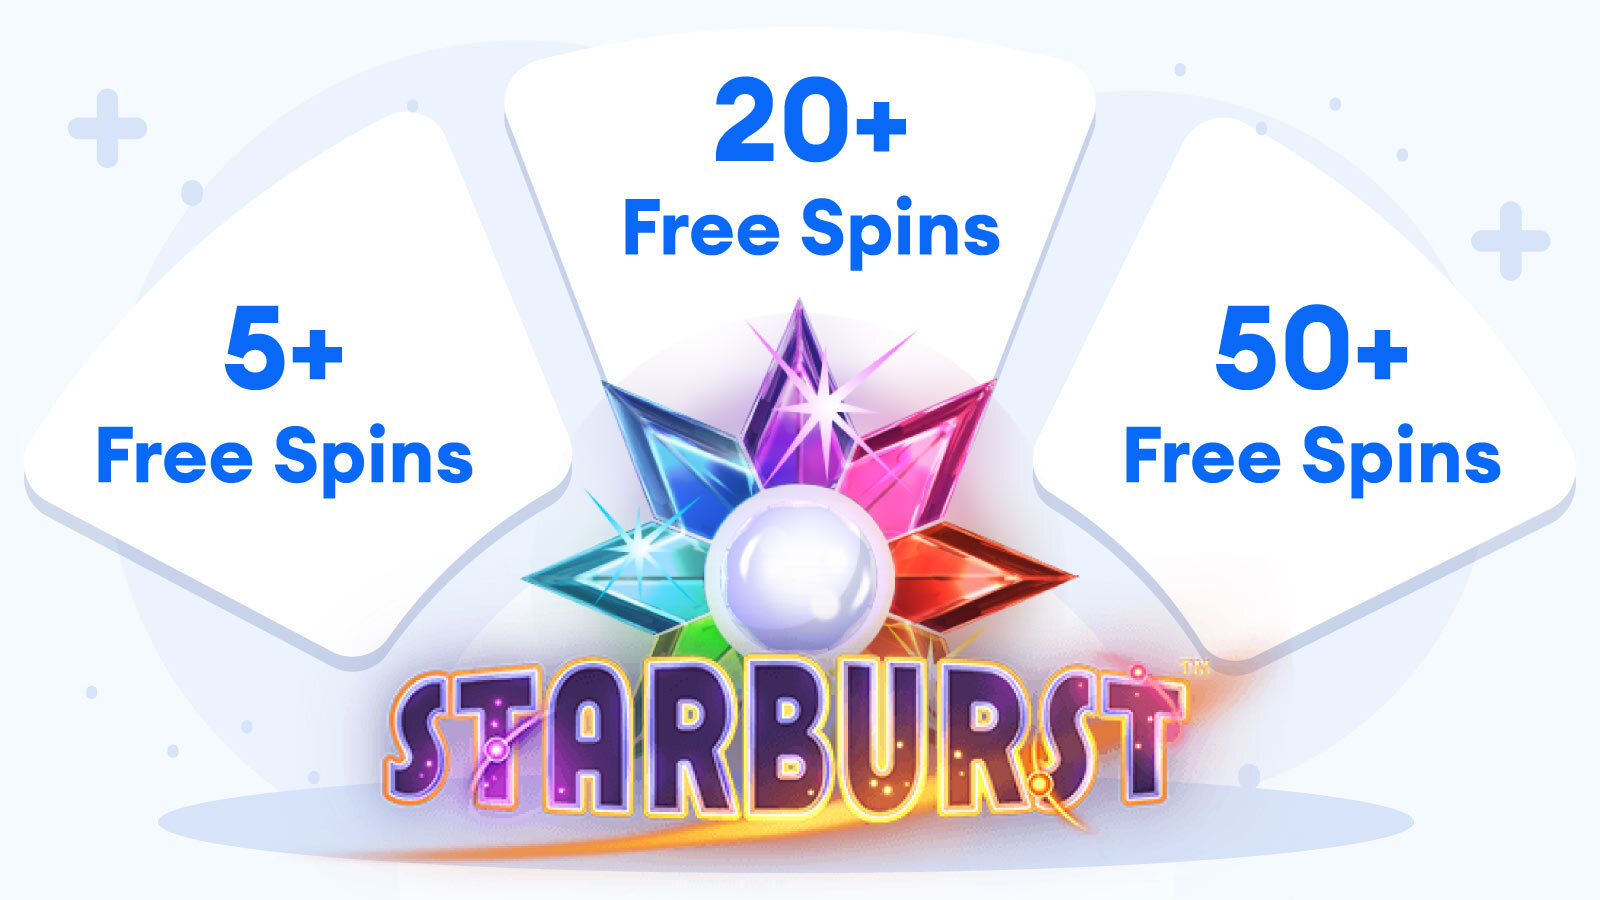 Starburst Free Spins – How Many Can You Get